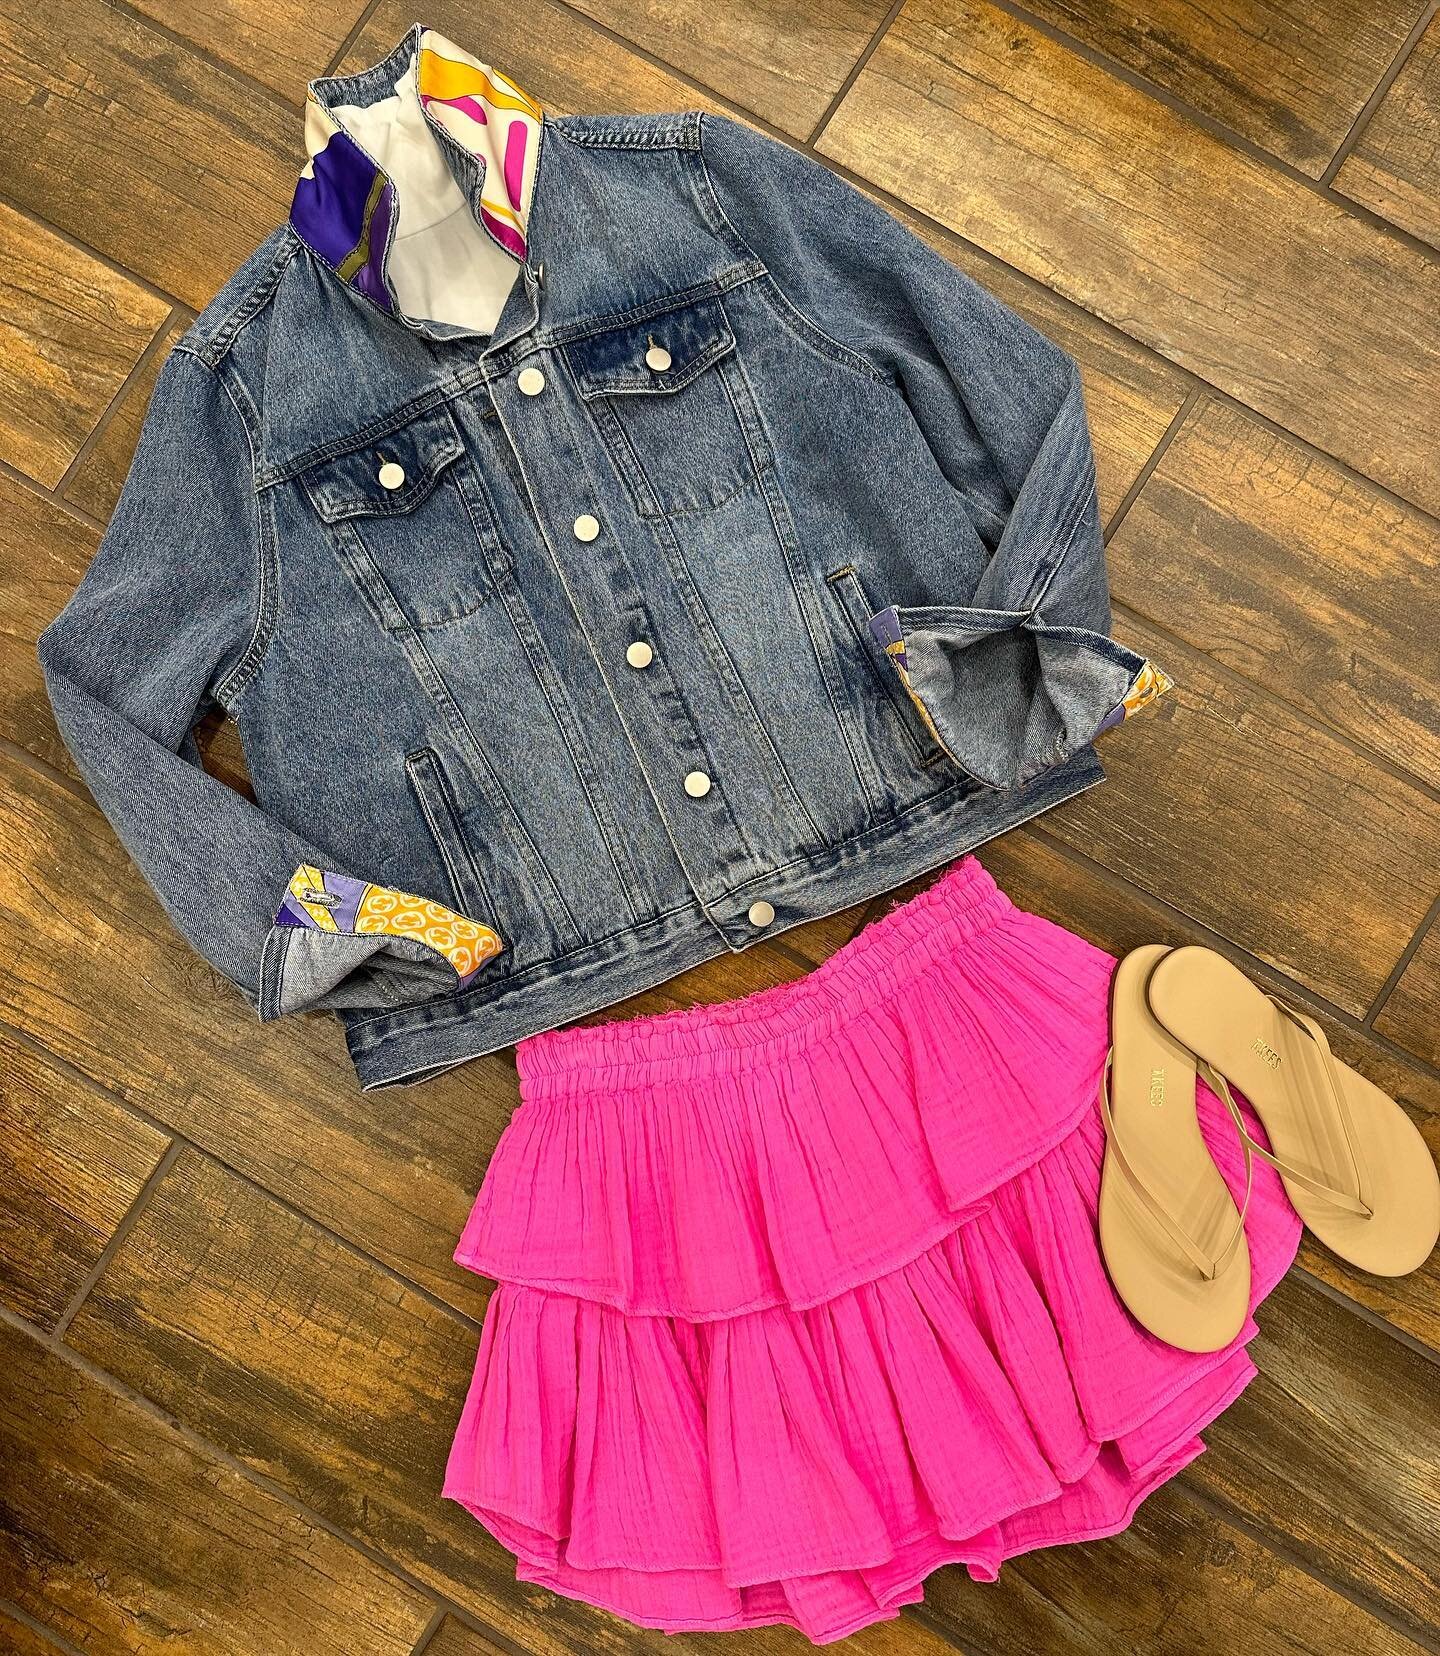 A pop of color for this cloudy day! Happy Friday!! #newarrivals #springstyle #springfashion #janeysat2500 #janeys #shoplocalamarillo #amarillotx #supportlocalbusiness #shoplocal #amarilloshopping #amarilloboutiques #boutiqueshopping